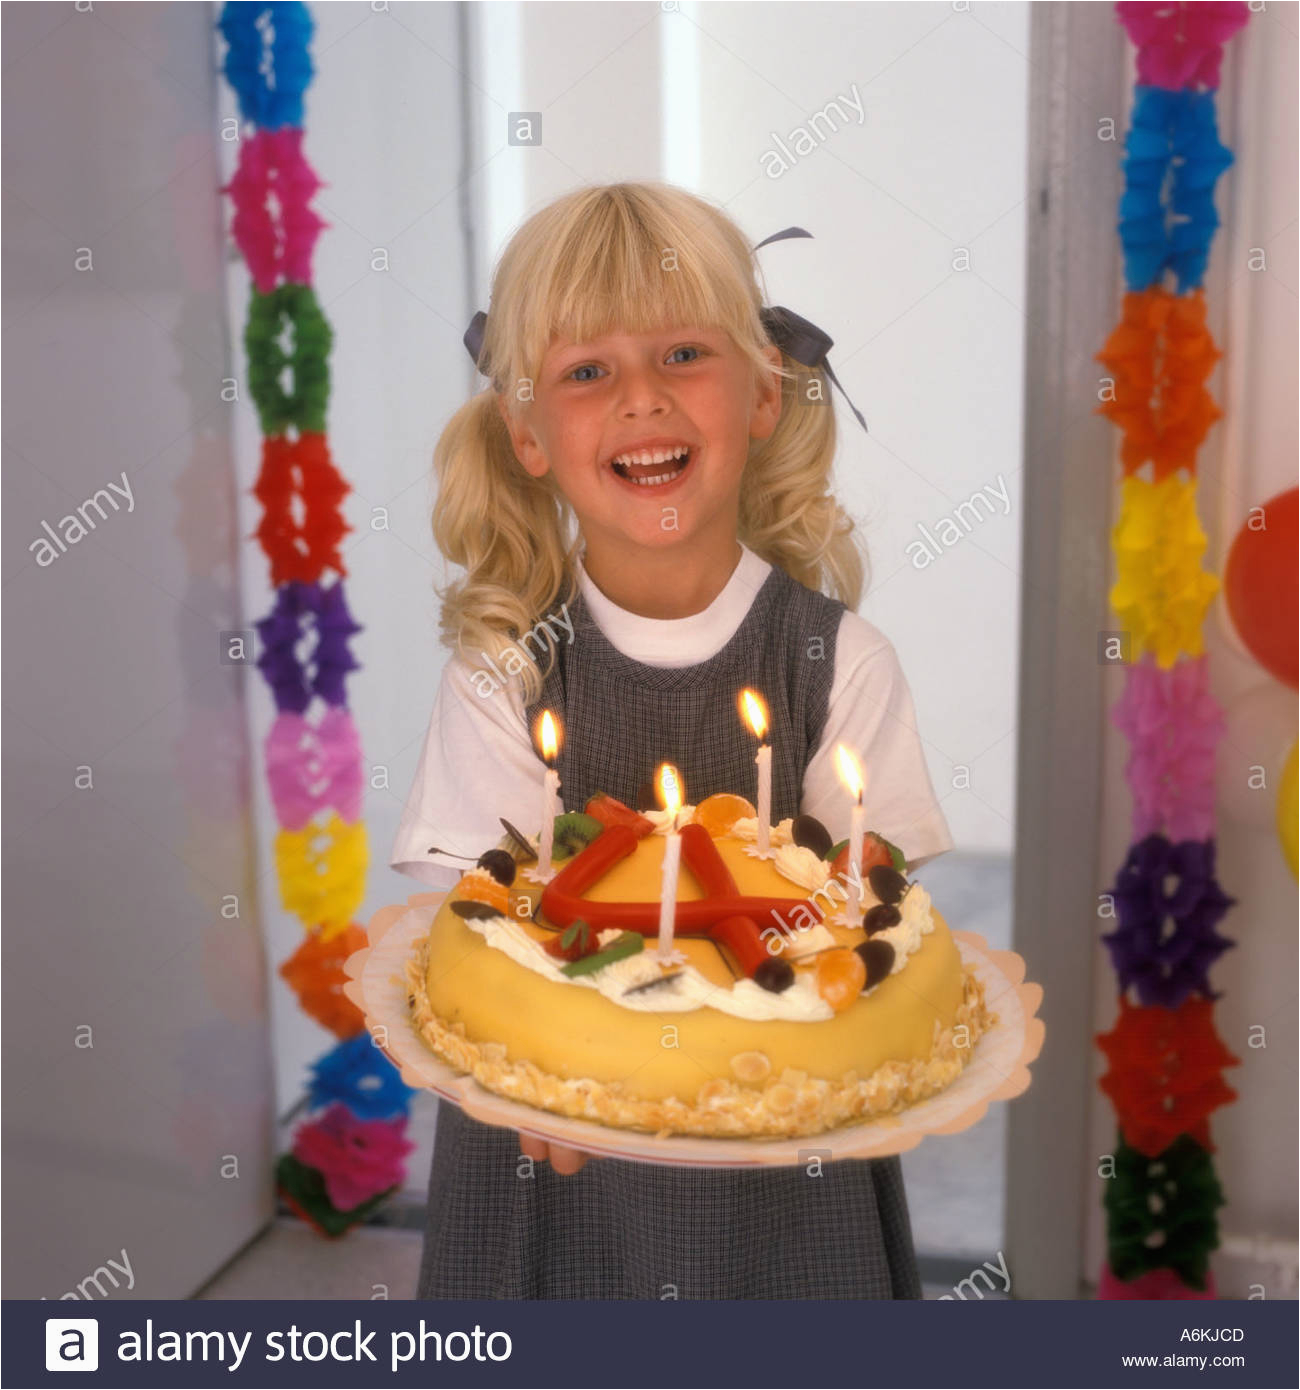 stock photo 4 year old girl with a birthday cake 3786444